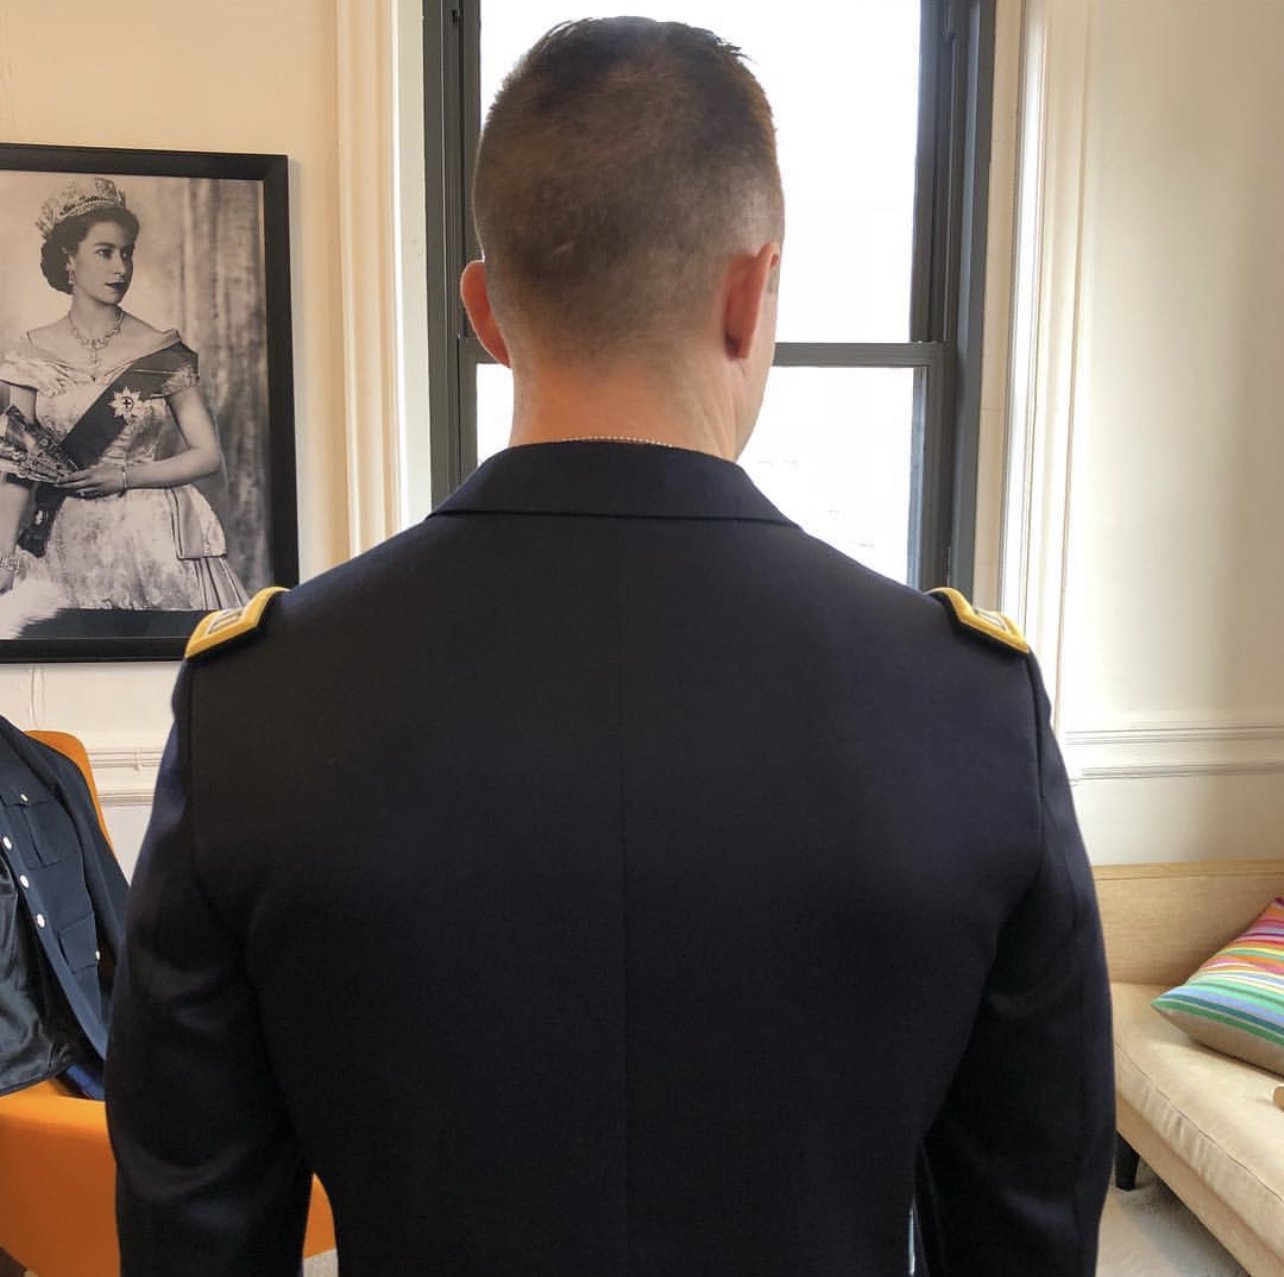 Being fitted for a bespoke military jacket: the view from the back